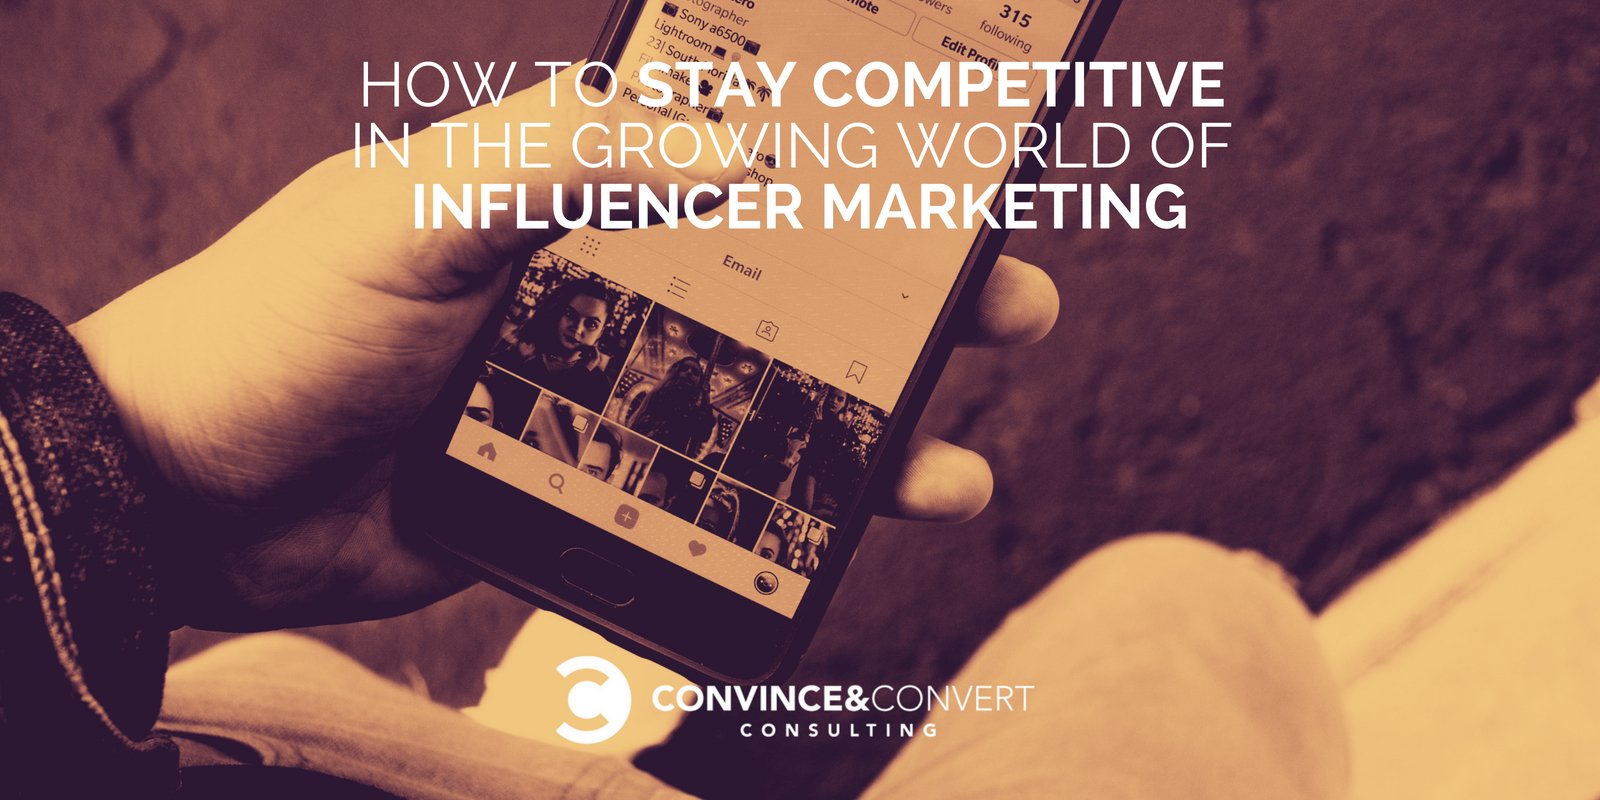 How to Stay Competitive in the Growing World of Influencer Marketing